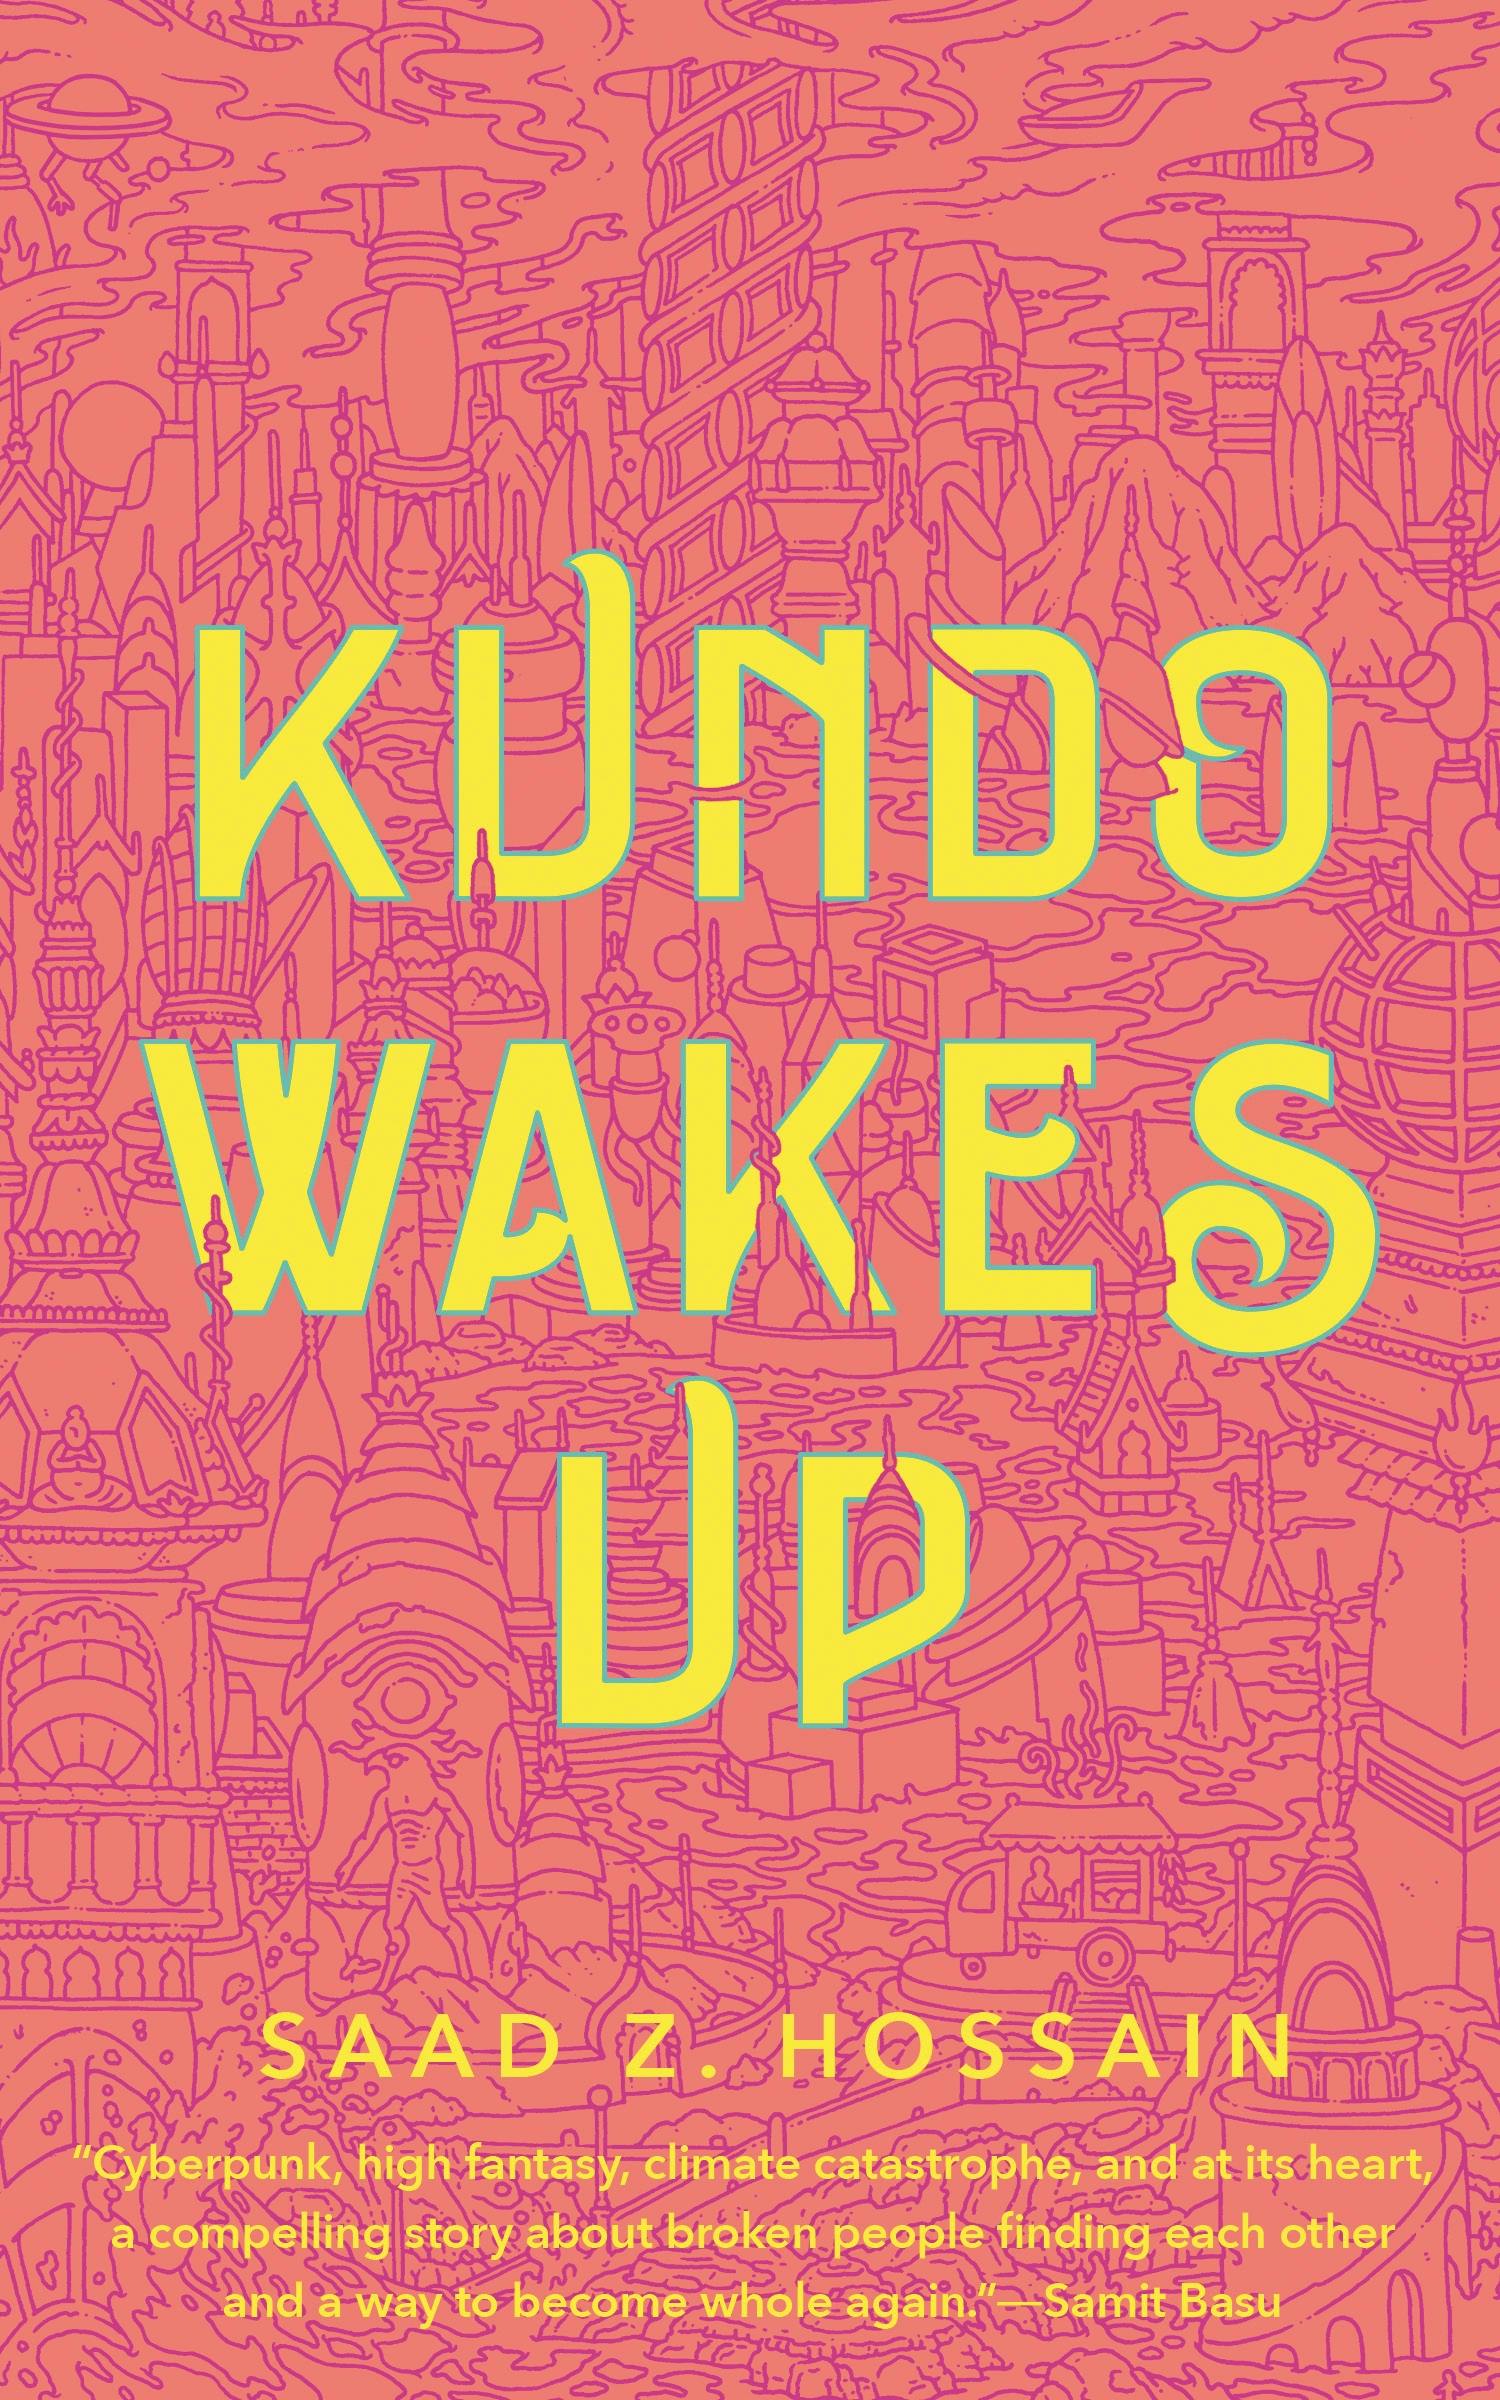 Cover for the book titled as: Kundo Wakes Up